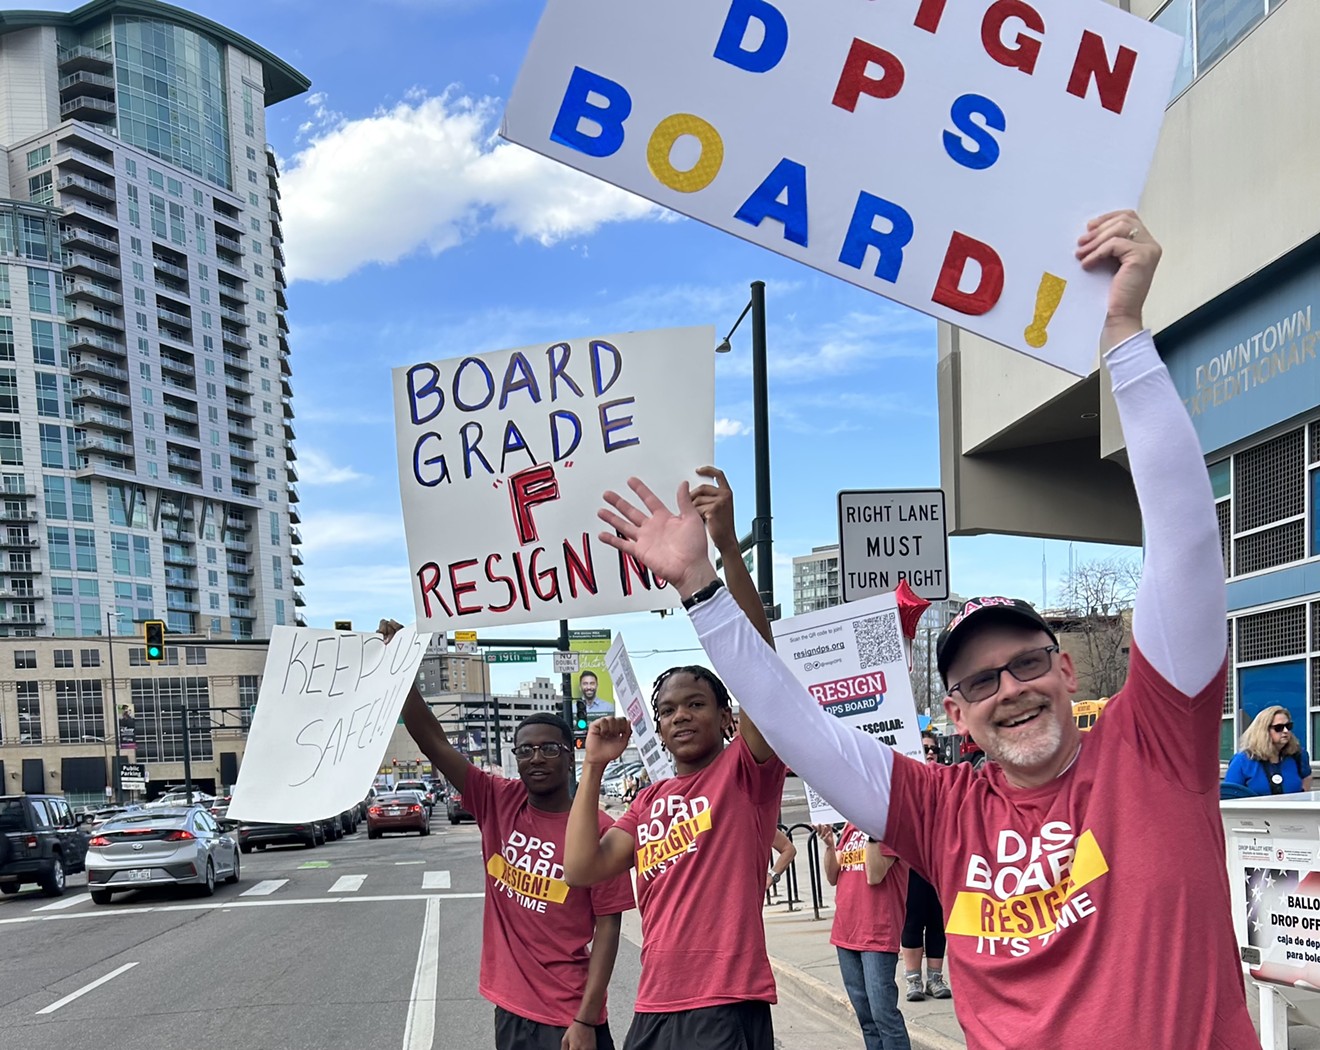 Resign DPS has been pushing for Denver school board members to step down since March.